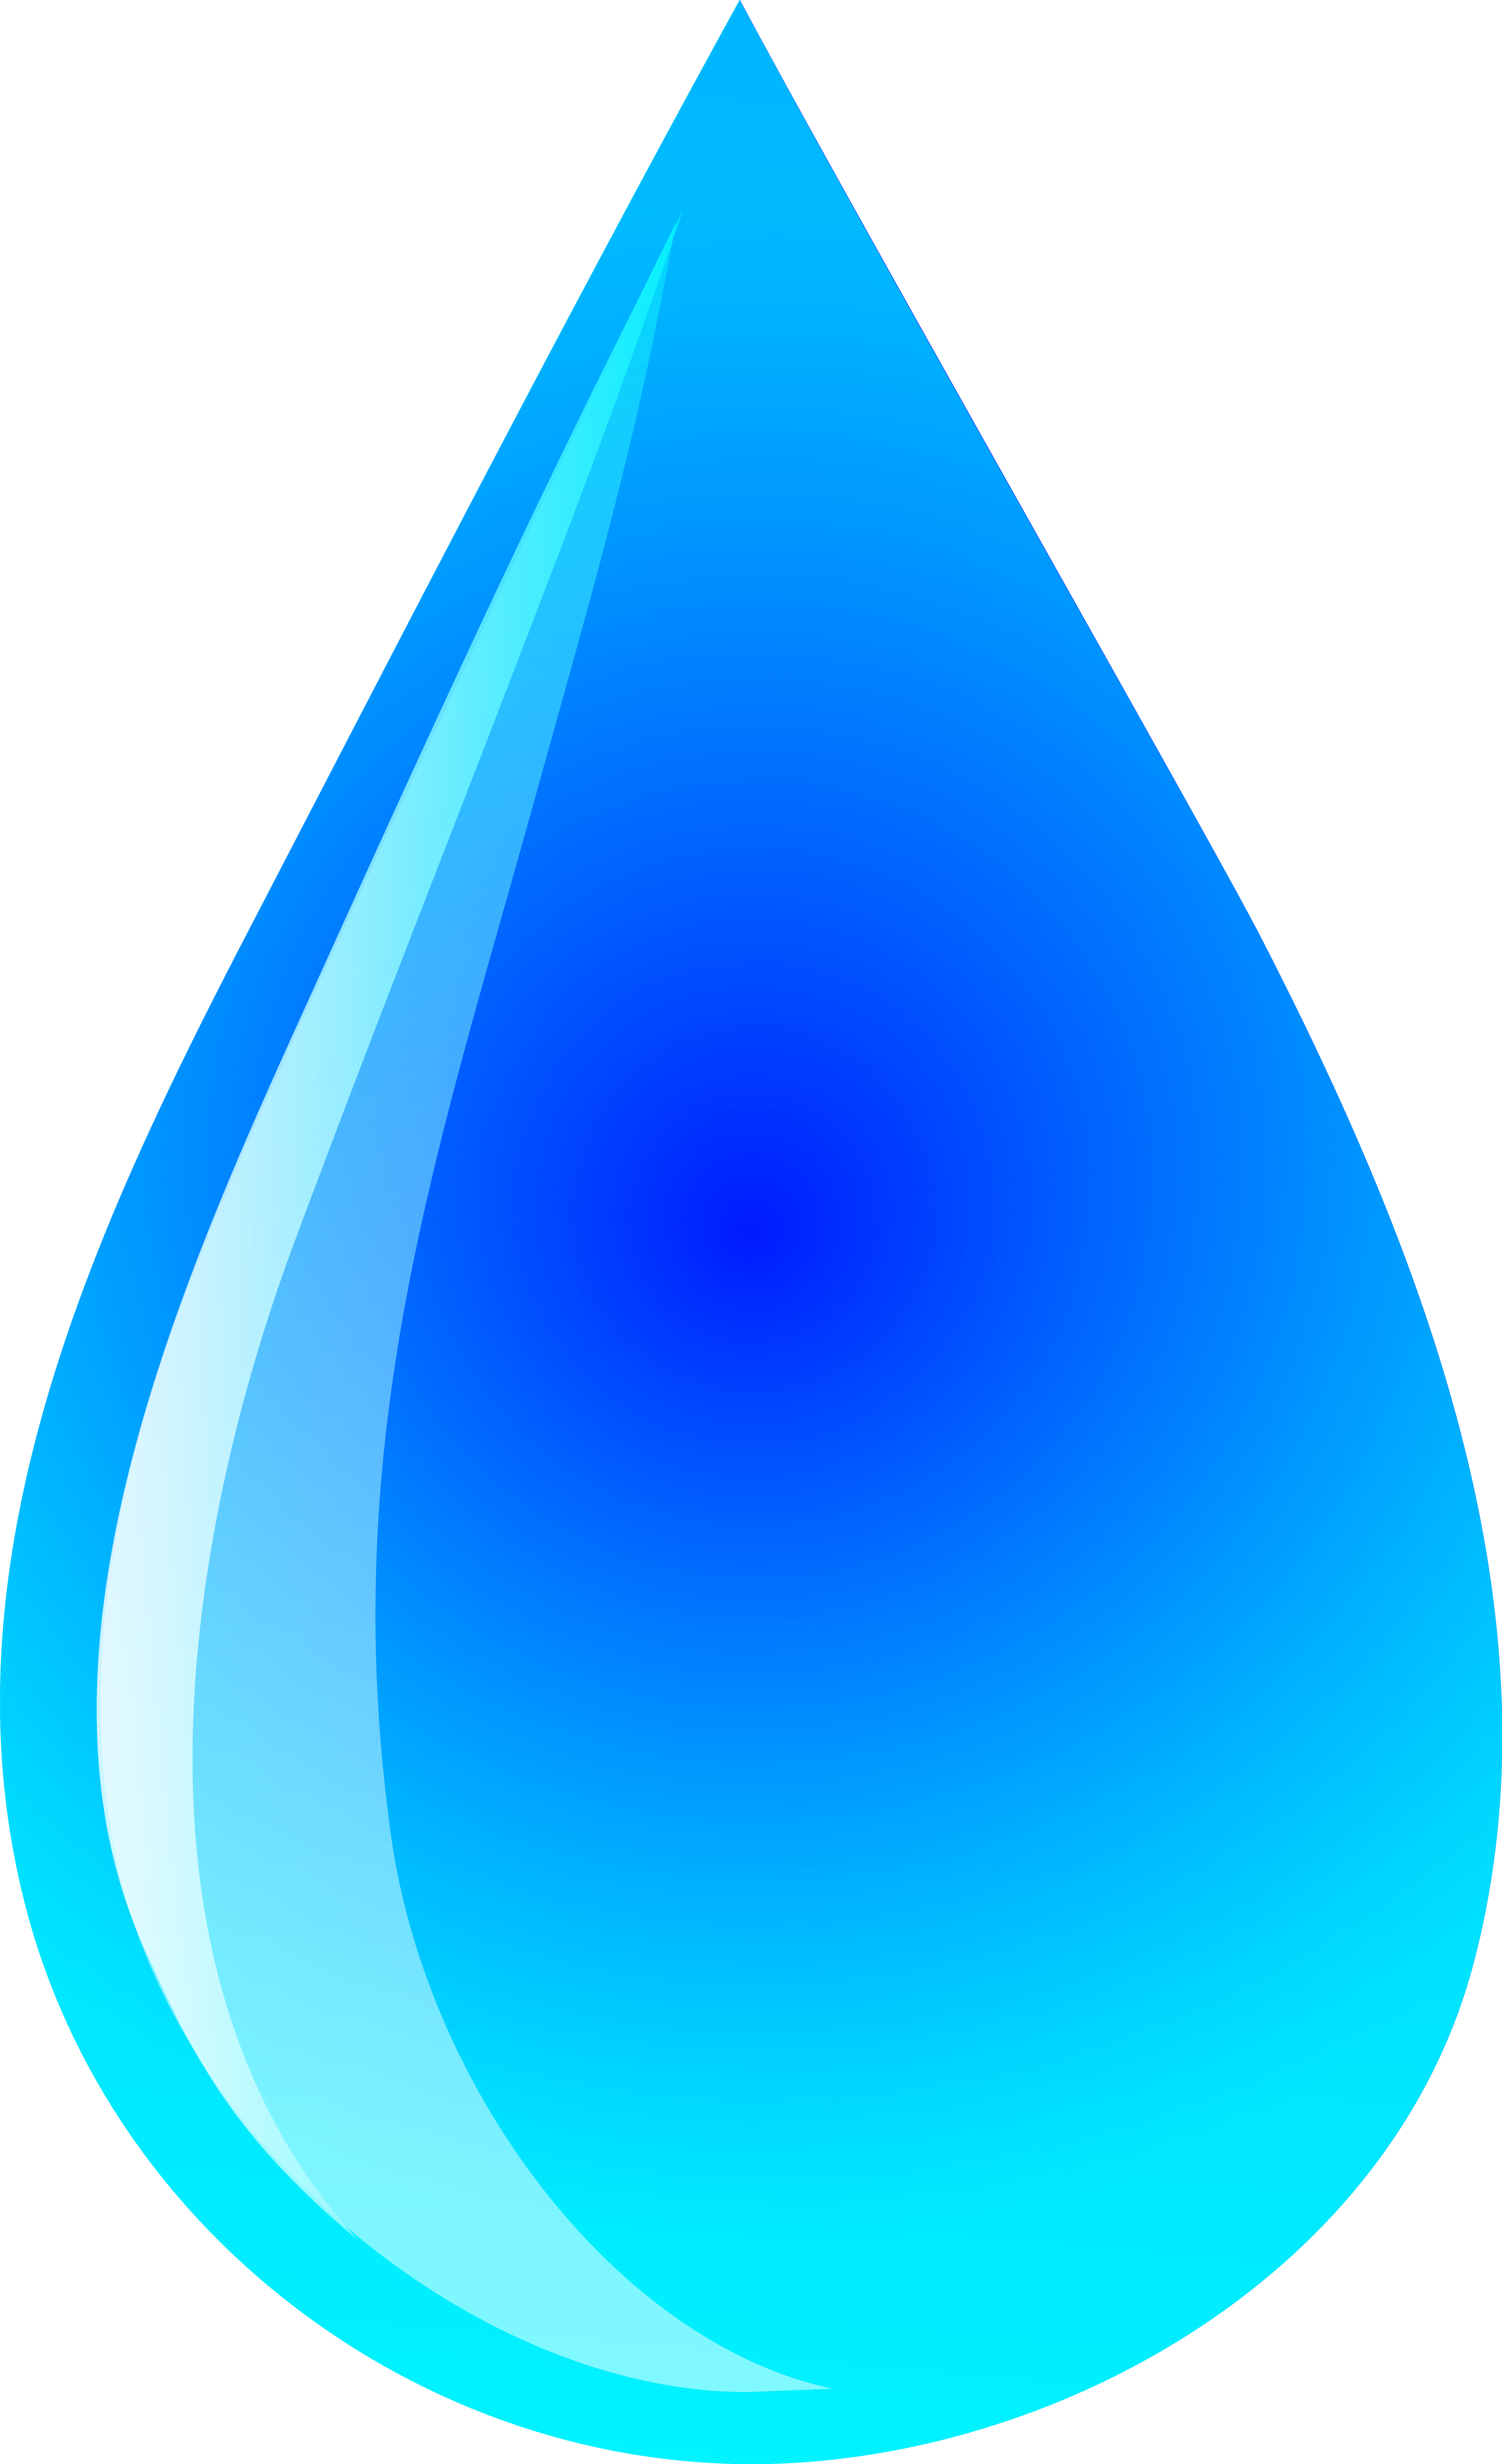 Water drop clipart icon